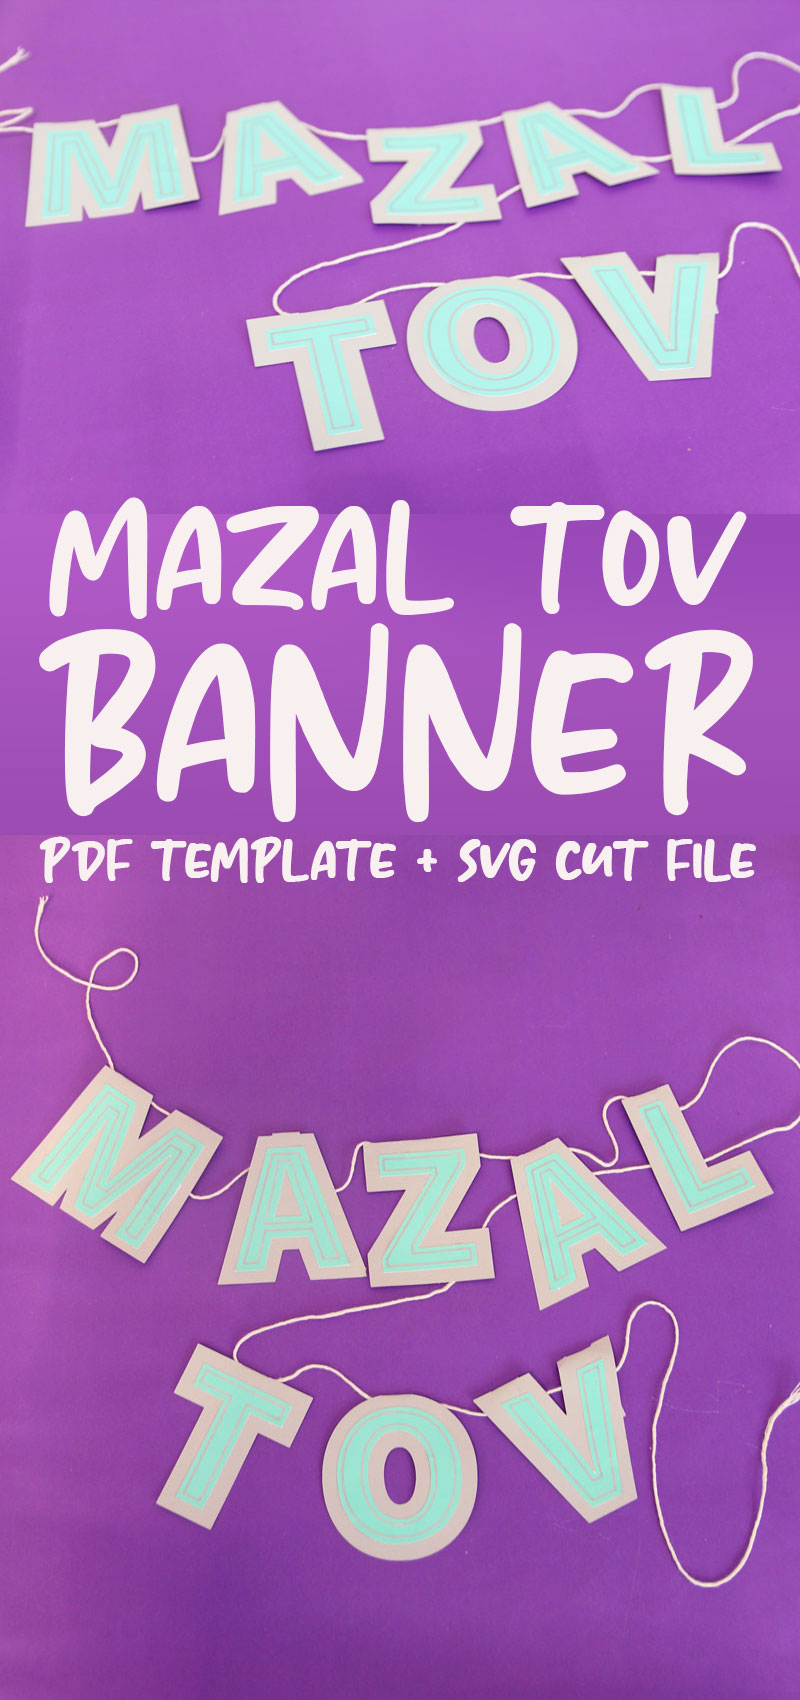 Mazel tov banner hero image with text